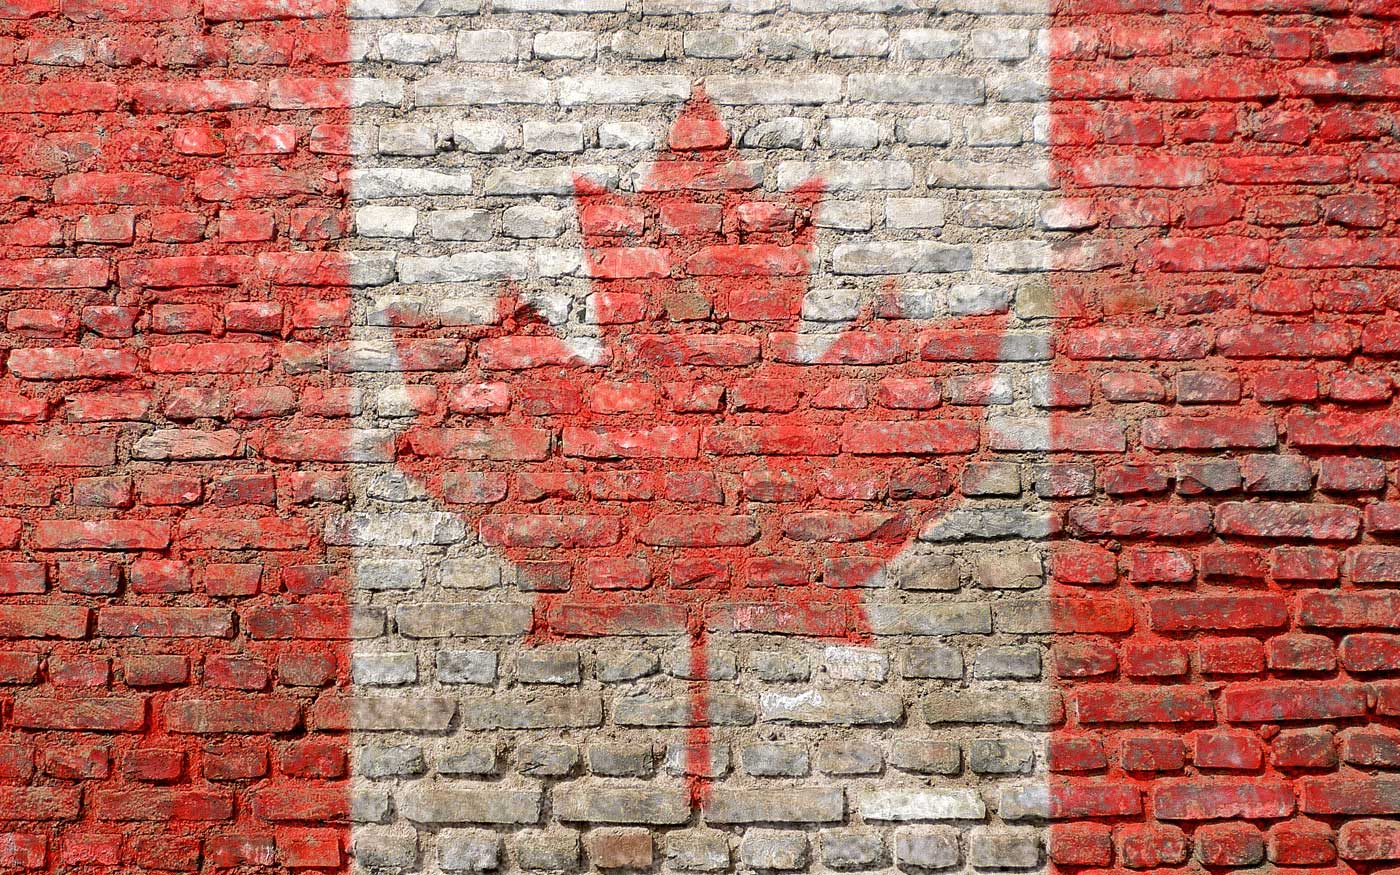 What is Canada and What Canadian Values Represent us Best?